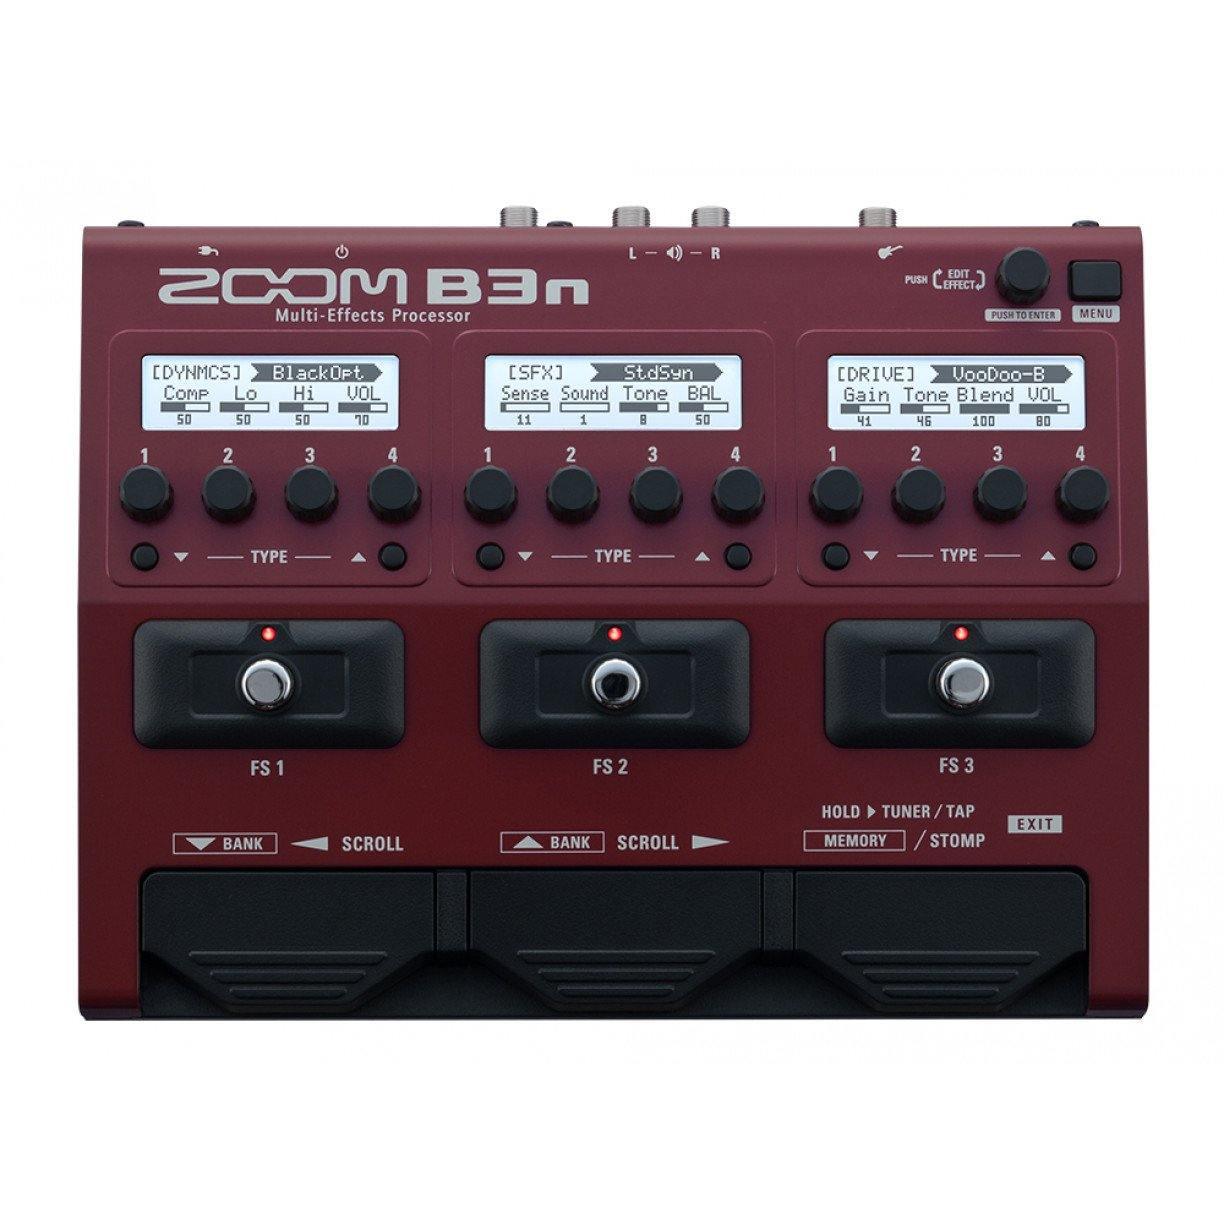 Zoom B3N Bass Effects & Amp Simulator - Guitar - Effects Pedals by Zoom at Muso's Stuff